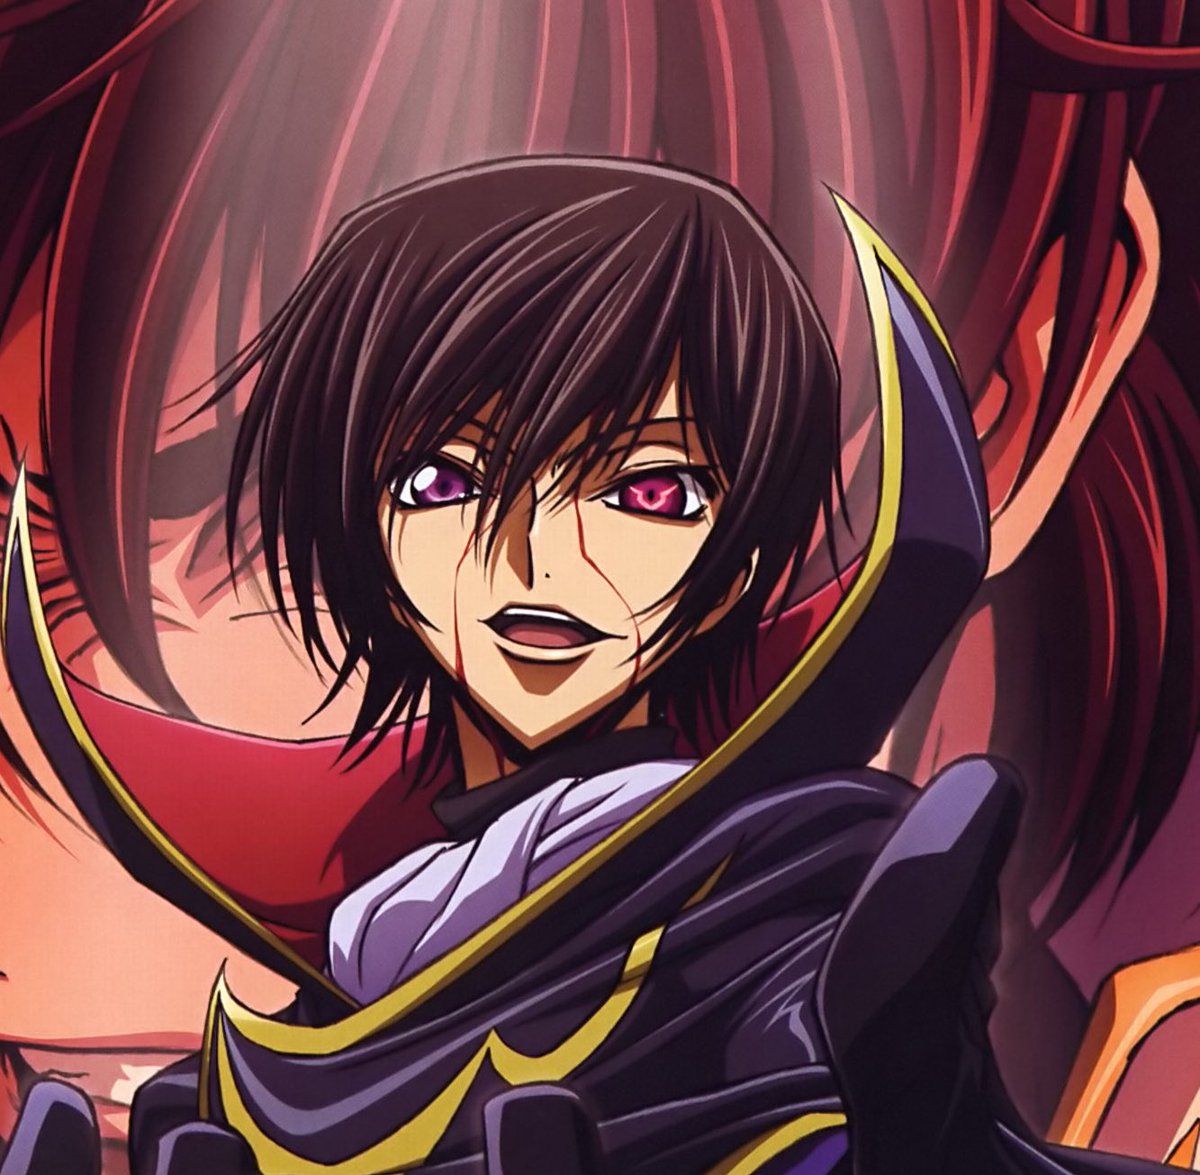 Lelouch and Eren are still my no.1 protagonists of all time.